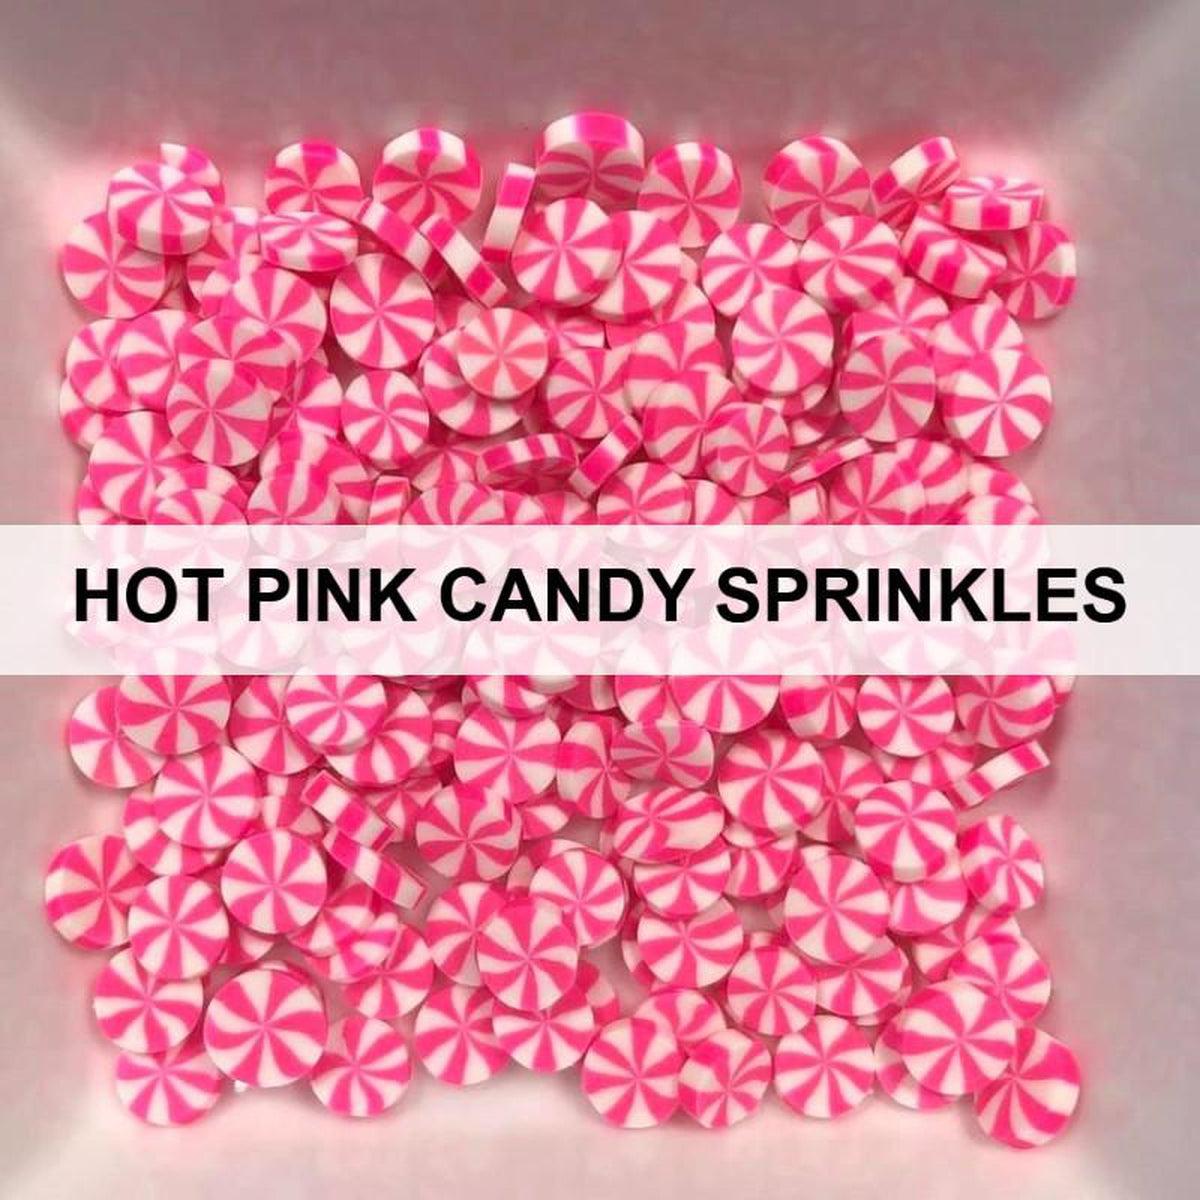 Hot Pink Candy Sprinkles by Kat Scrappiness - Kat Scrappiness